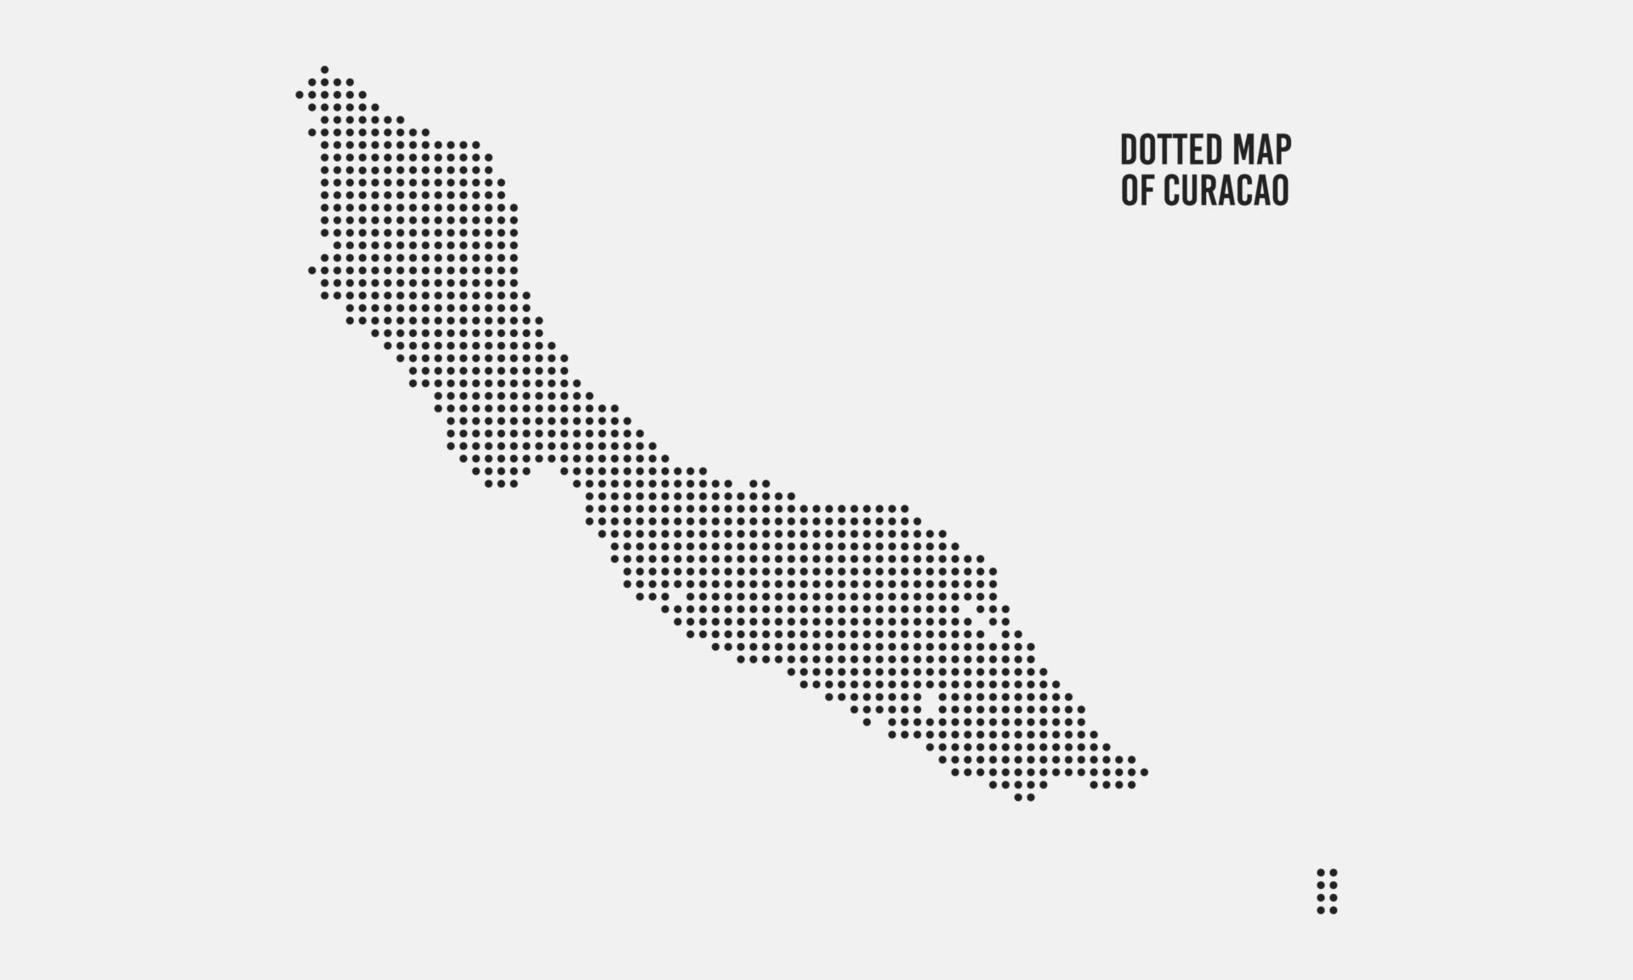 Abstract Dotted Curacao Map vector